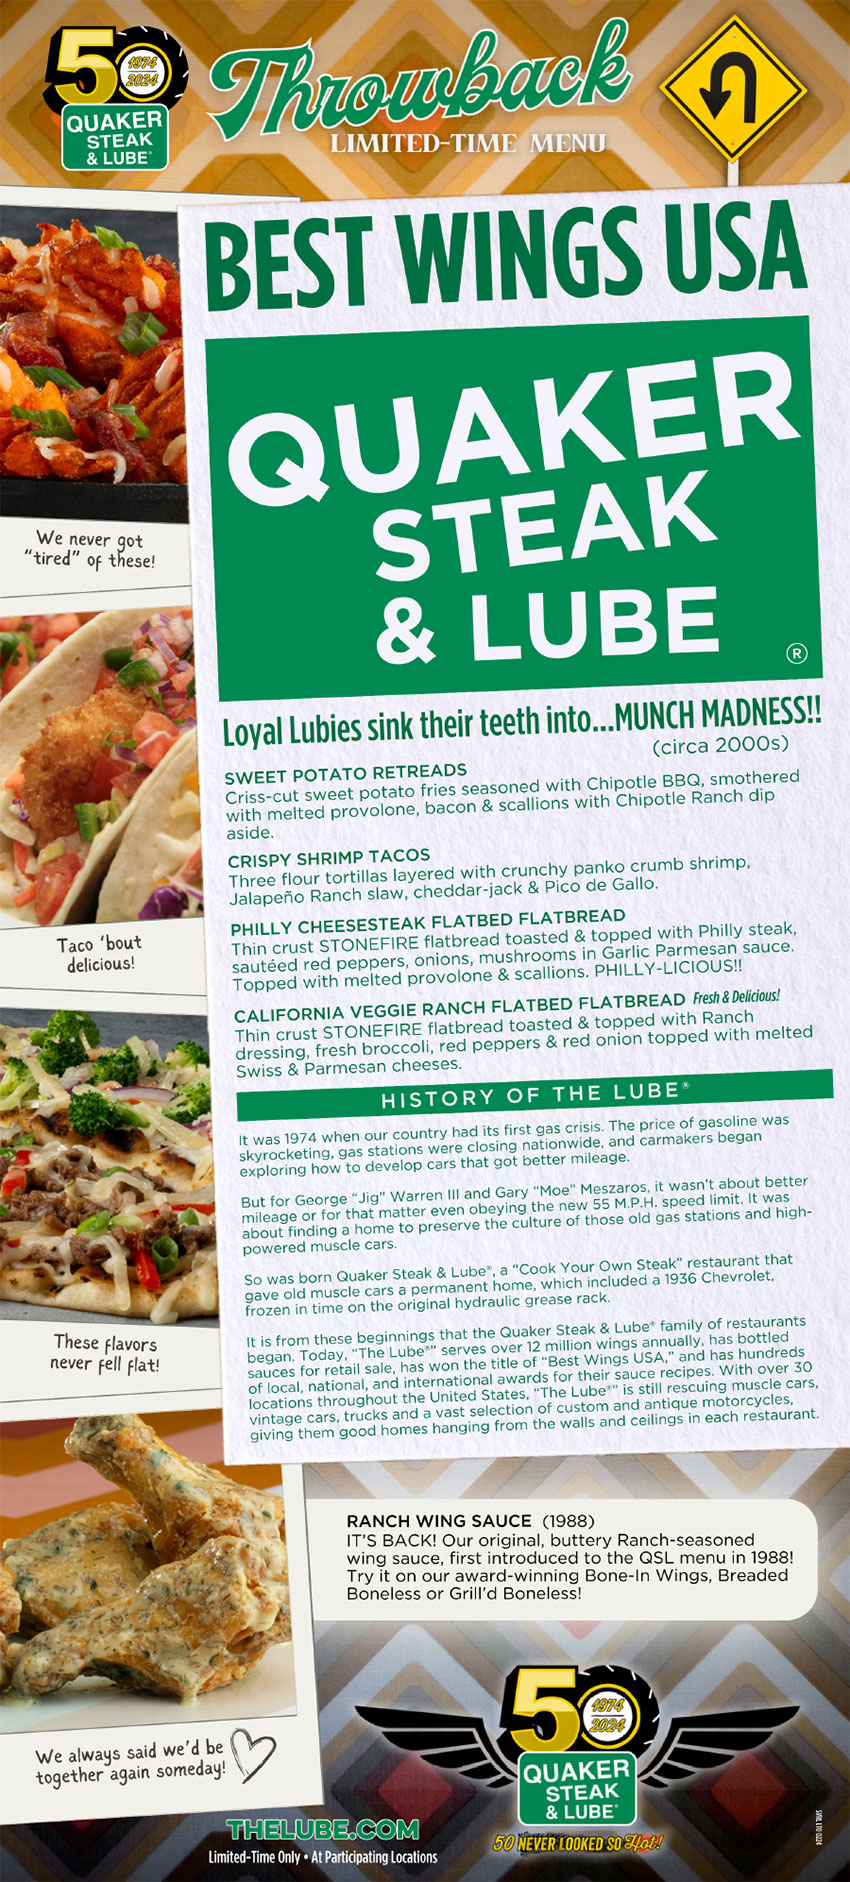 Throwback Limited Time Menu At the Quaker Steak & Lube Austintown Restaurant